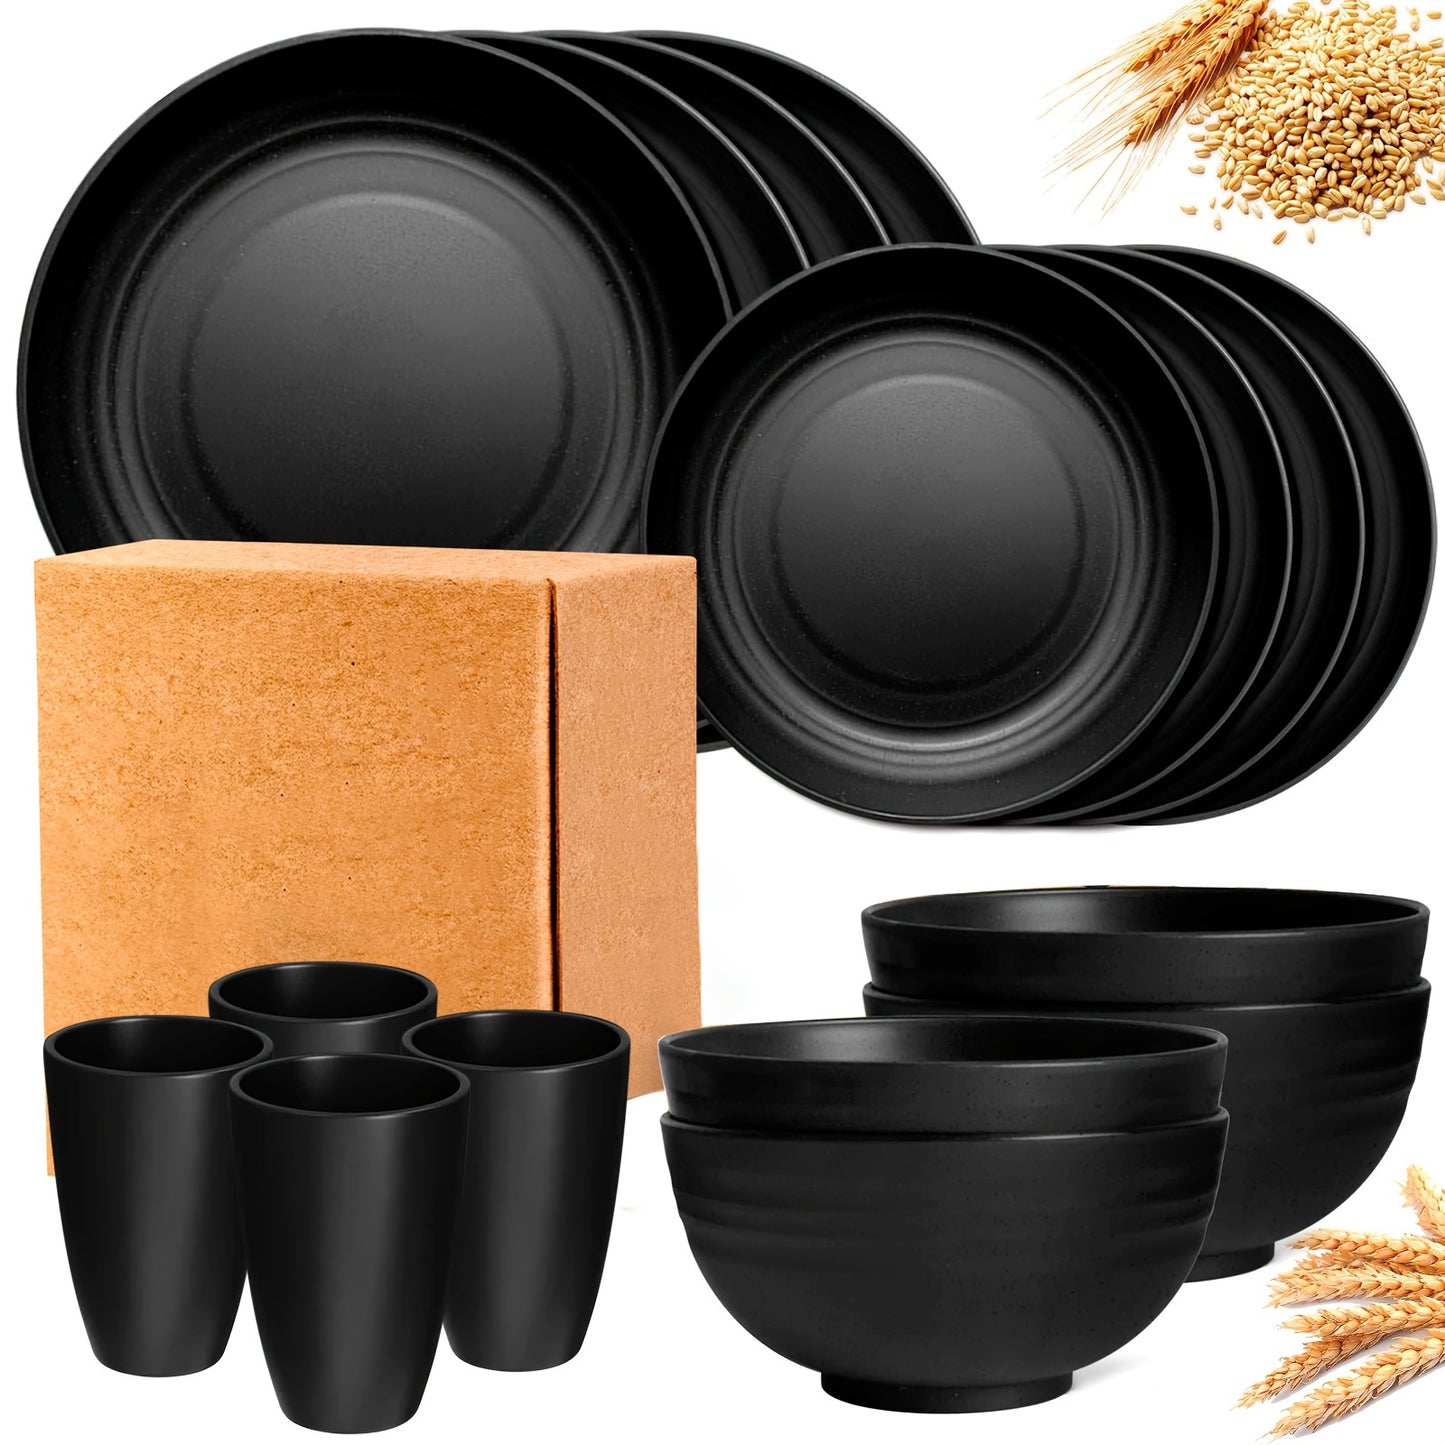 16 Piece Kitchen Wheat Straw Dinnerware Set, Service For 4, Dinner Plates, Dessert Plate, Cereal Bowls, Cups, Unbreakable Plastic Outdoor Camping Dishes, Black